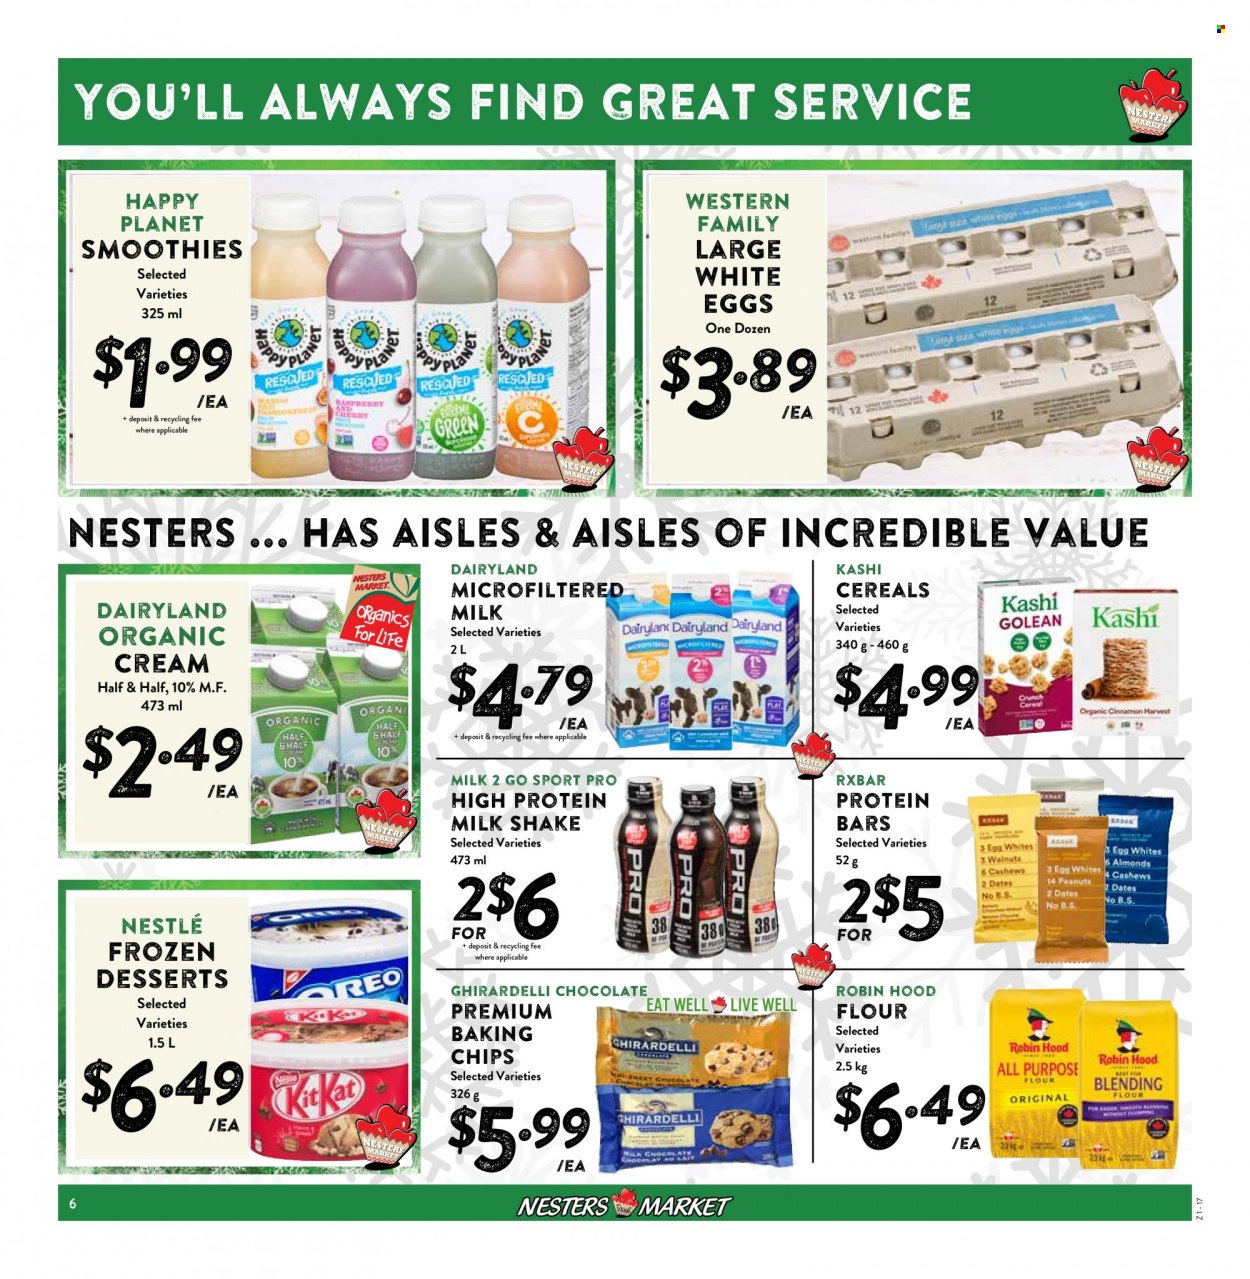 thumbnail - Nesters Food Market Flyer - November 27, 2022 - December 03, 2022 - Sales products - milk, milkshake, shake, eggs, chocolate, Ghirardelli, flour, baking chips, cereals, protein bar, smoothie, Half and half, Nestlé. Page 6.